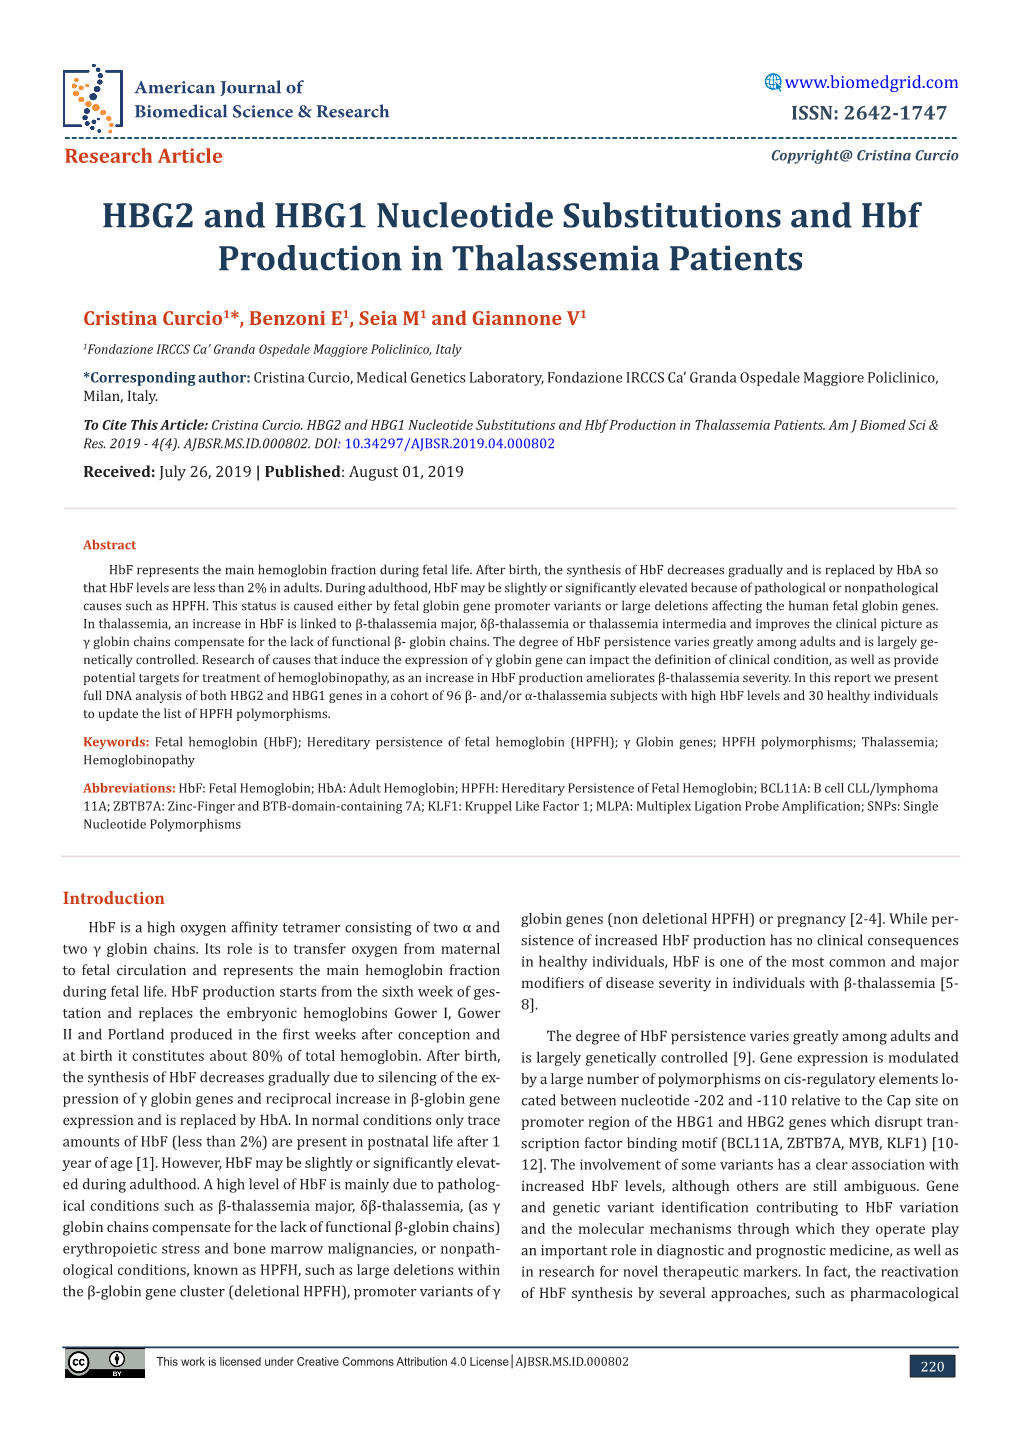 HBG2 and HBG1 Nucleotide Substitutions and Hbf Production in Thalassemia Patients